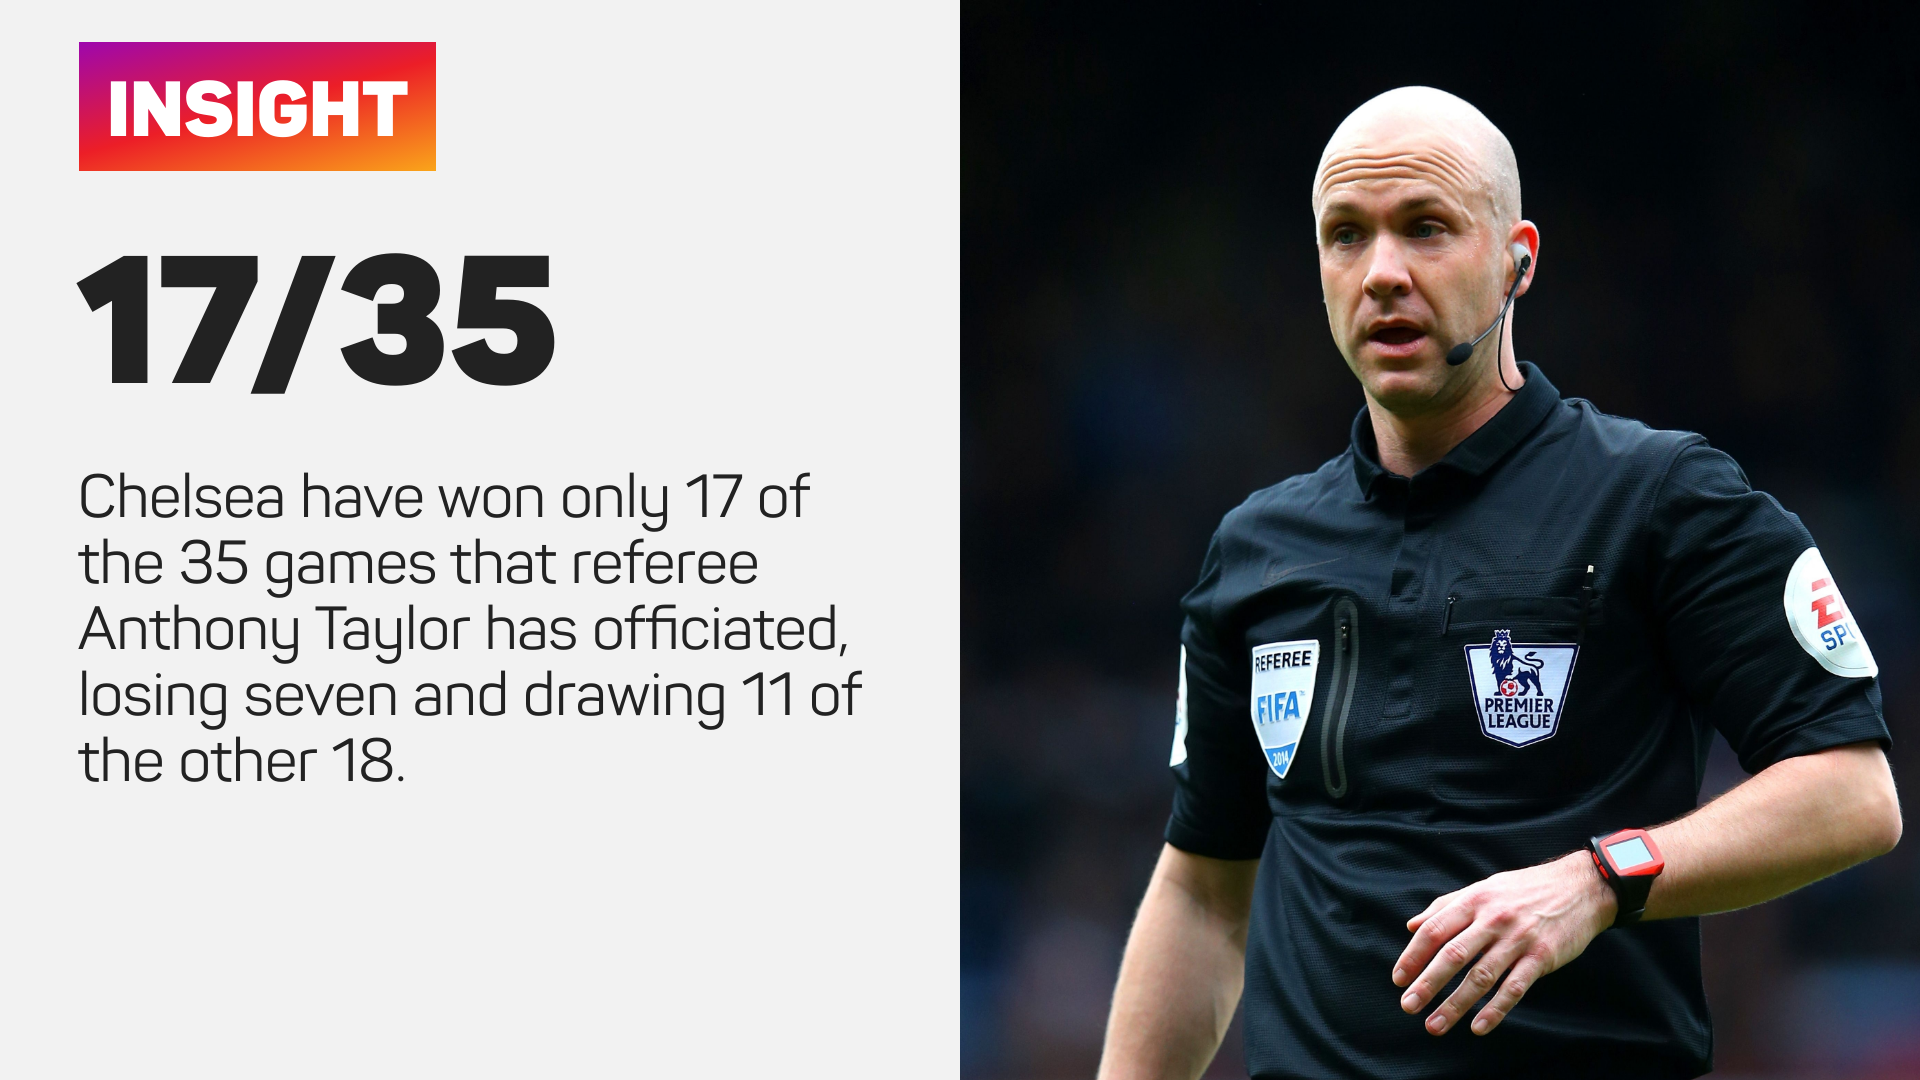 Chelsea have a poor record in matches Anthony Taylor has officiated